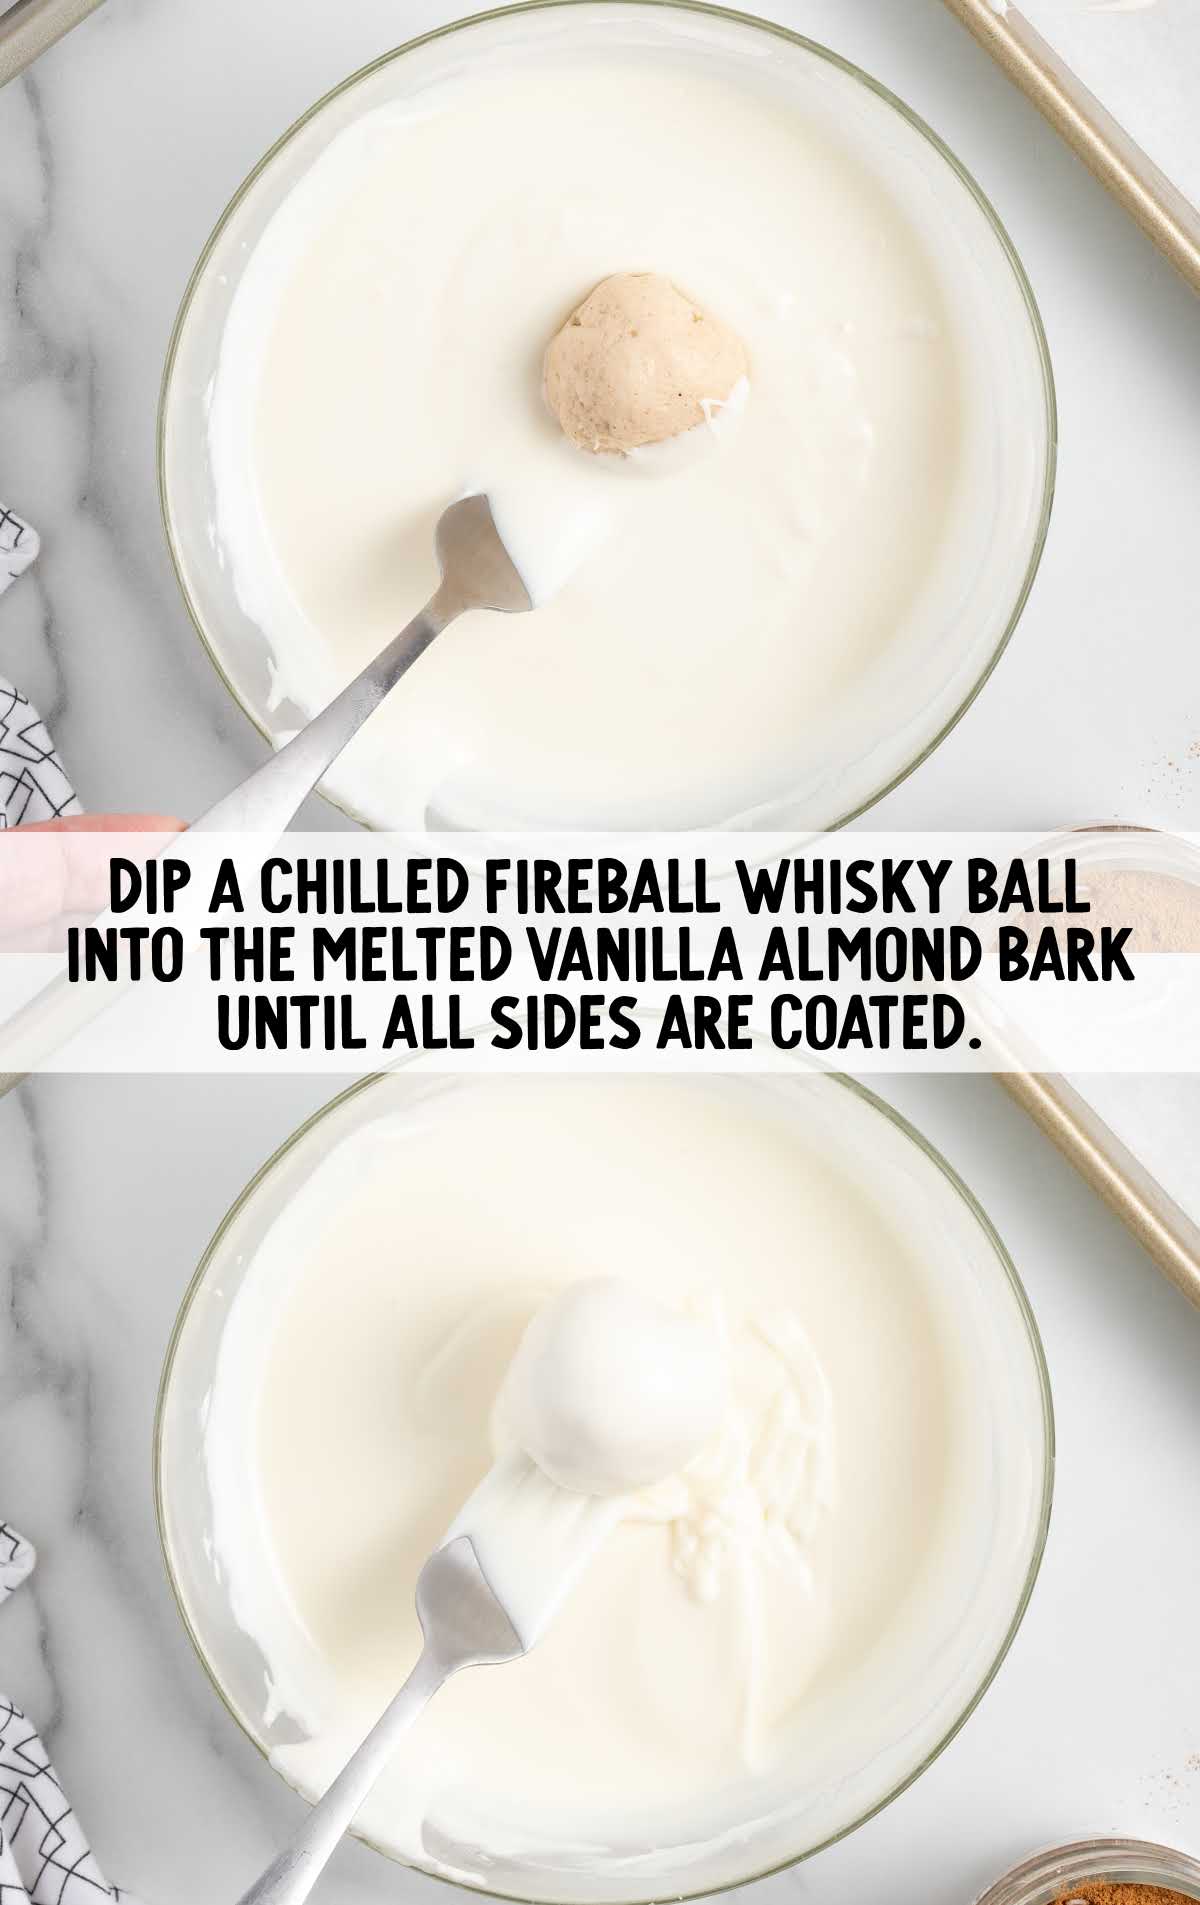 balls dipped into the melted vanilla almond bark